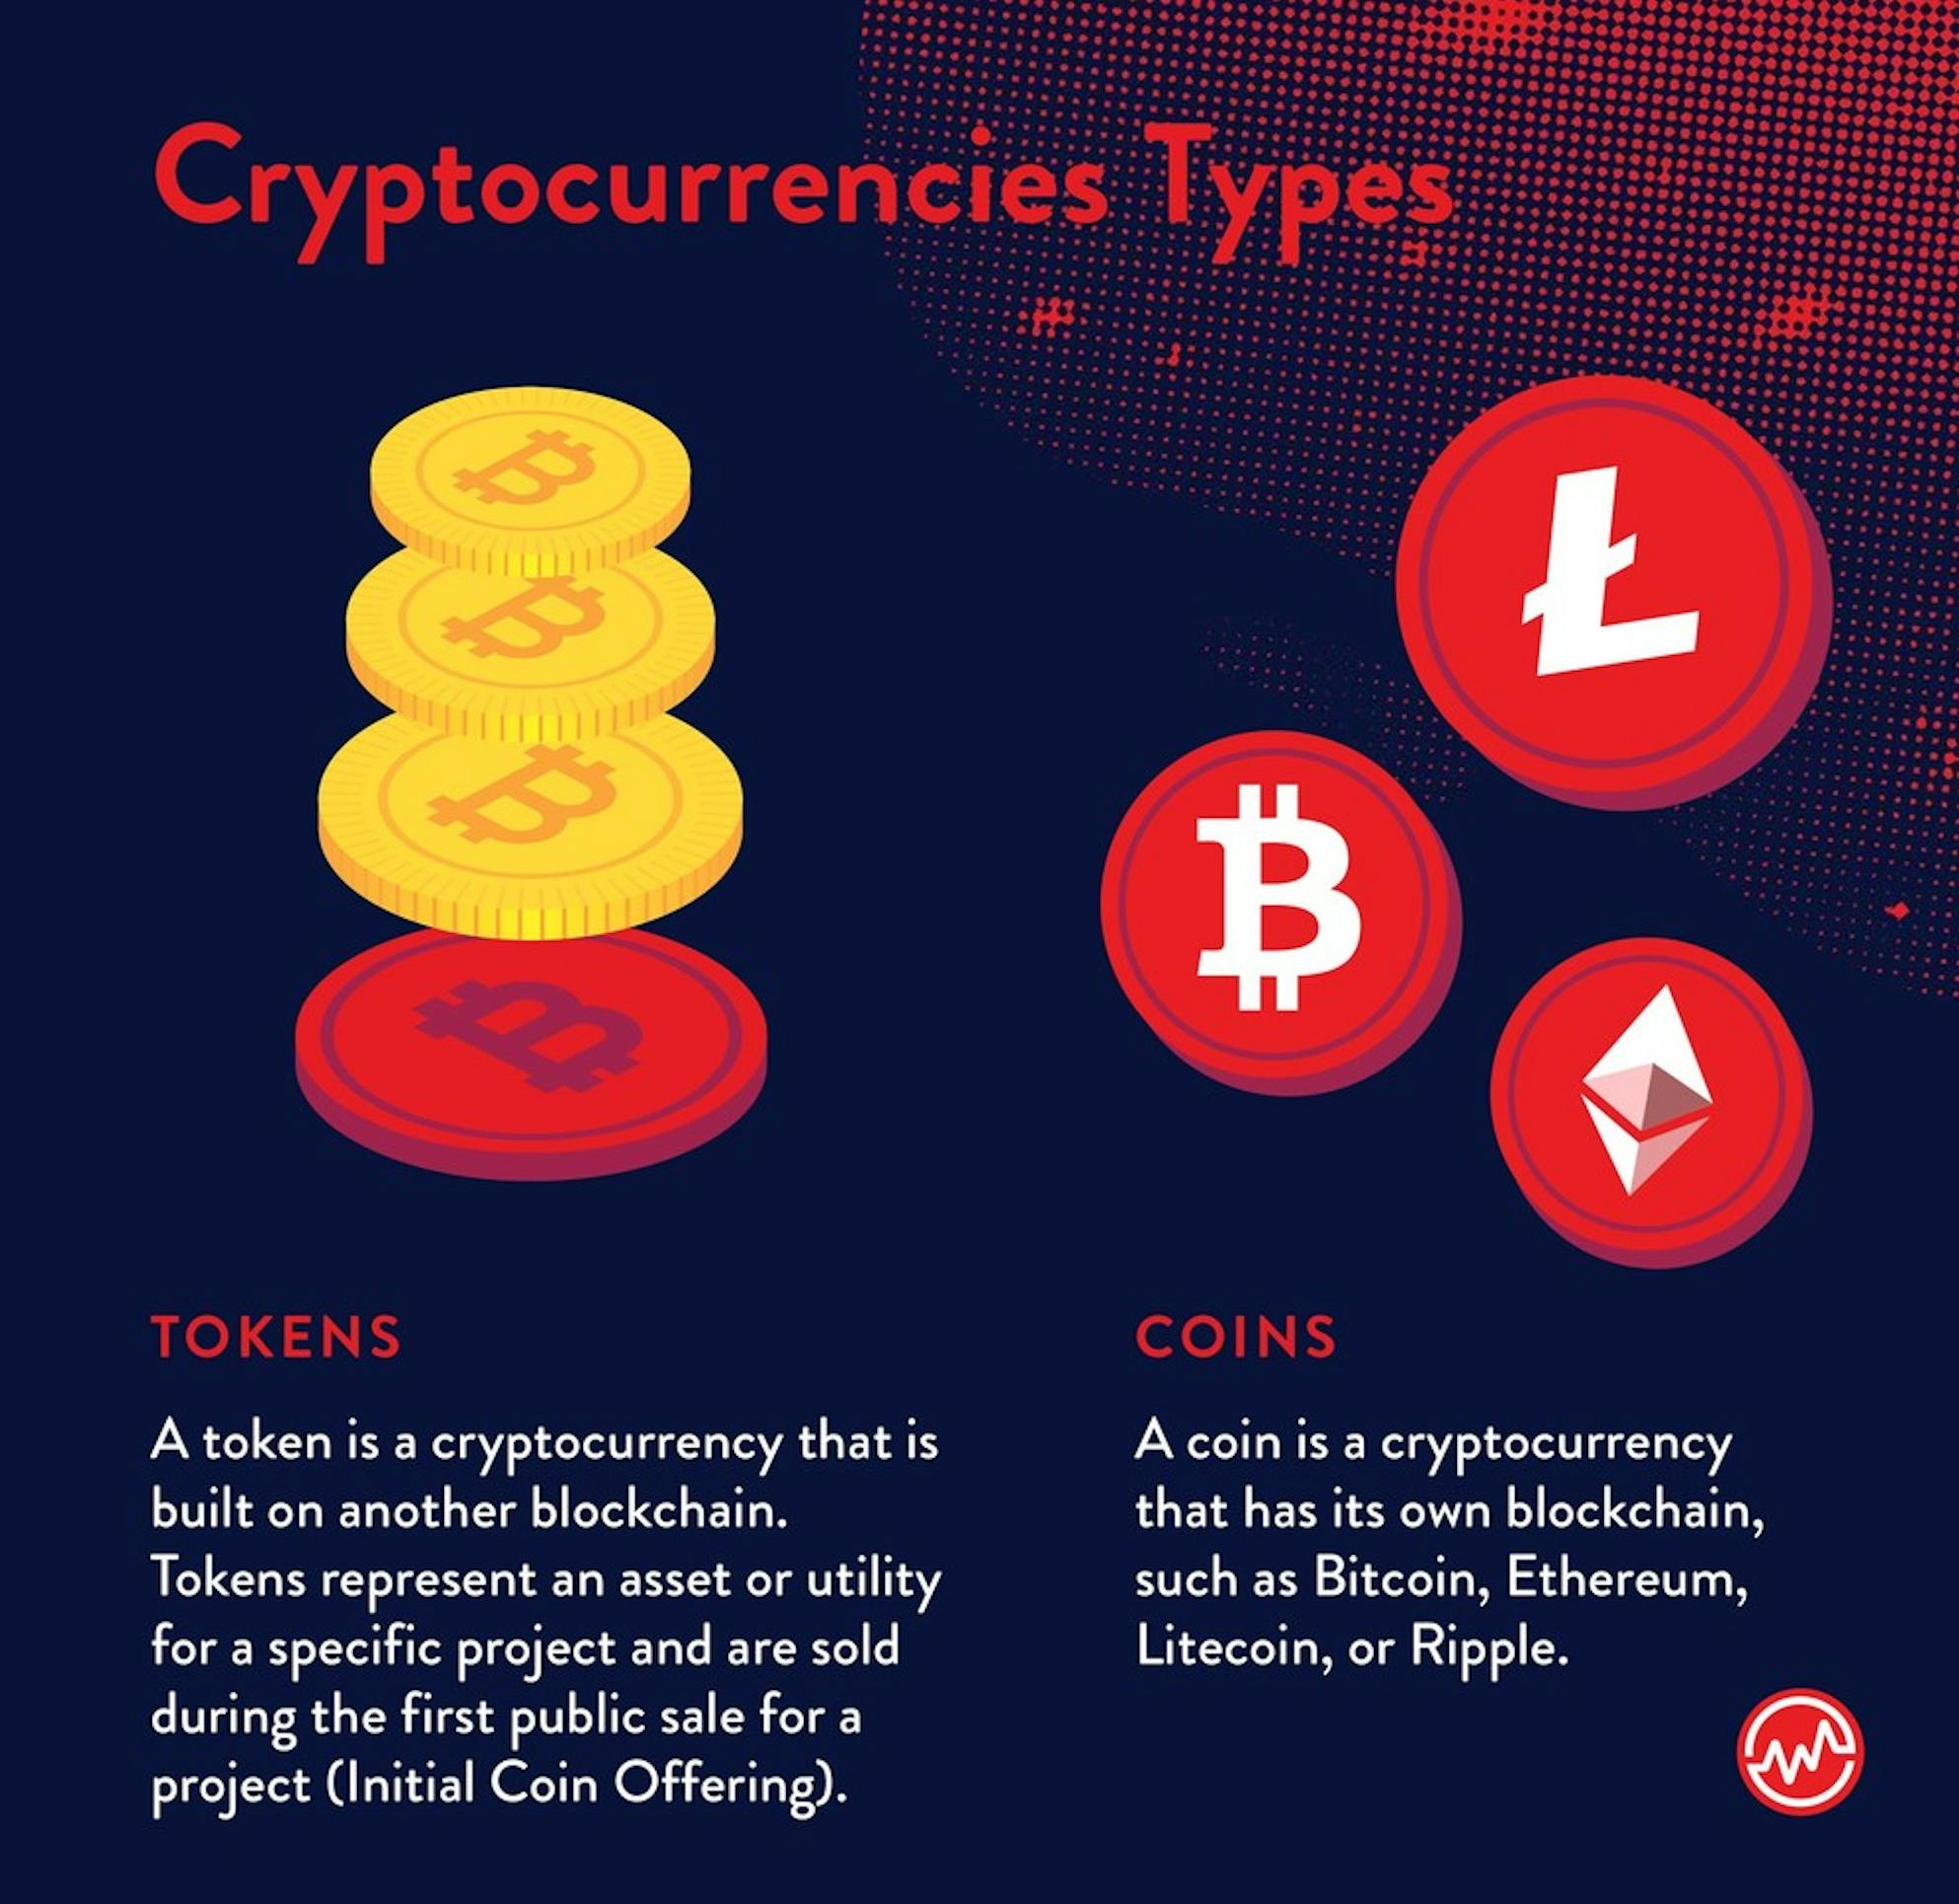 Types of cryptocurrencies: tokens and coins